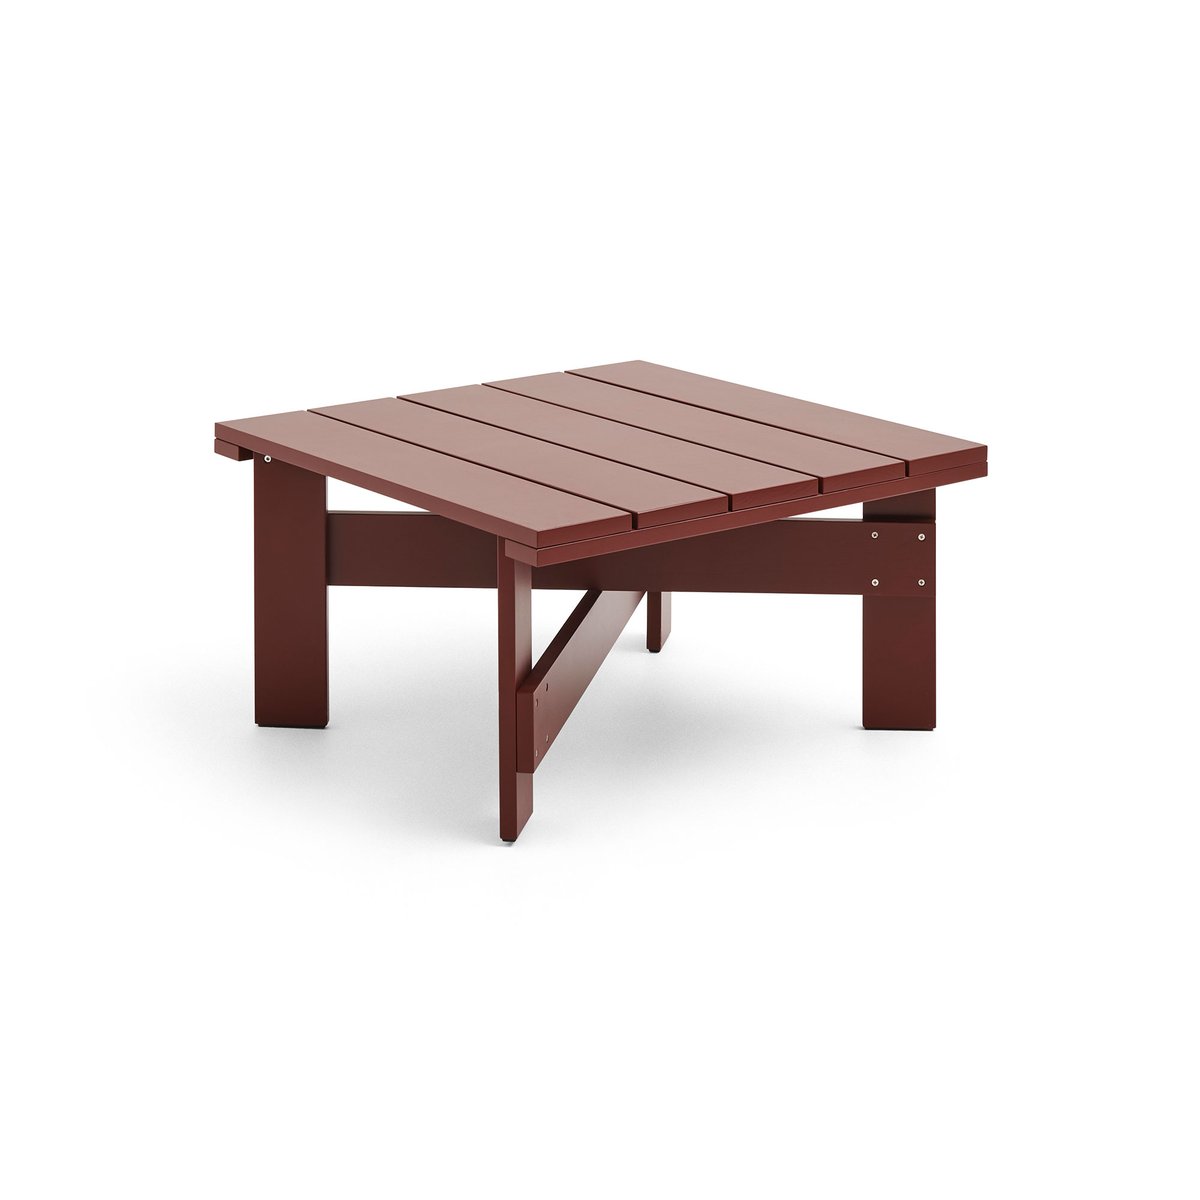 HAY Crate Low table tafel 75,5x75,5 cm gelakt sparrenhout iron red